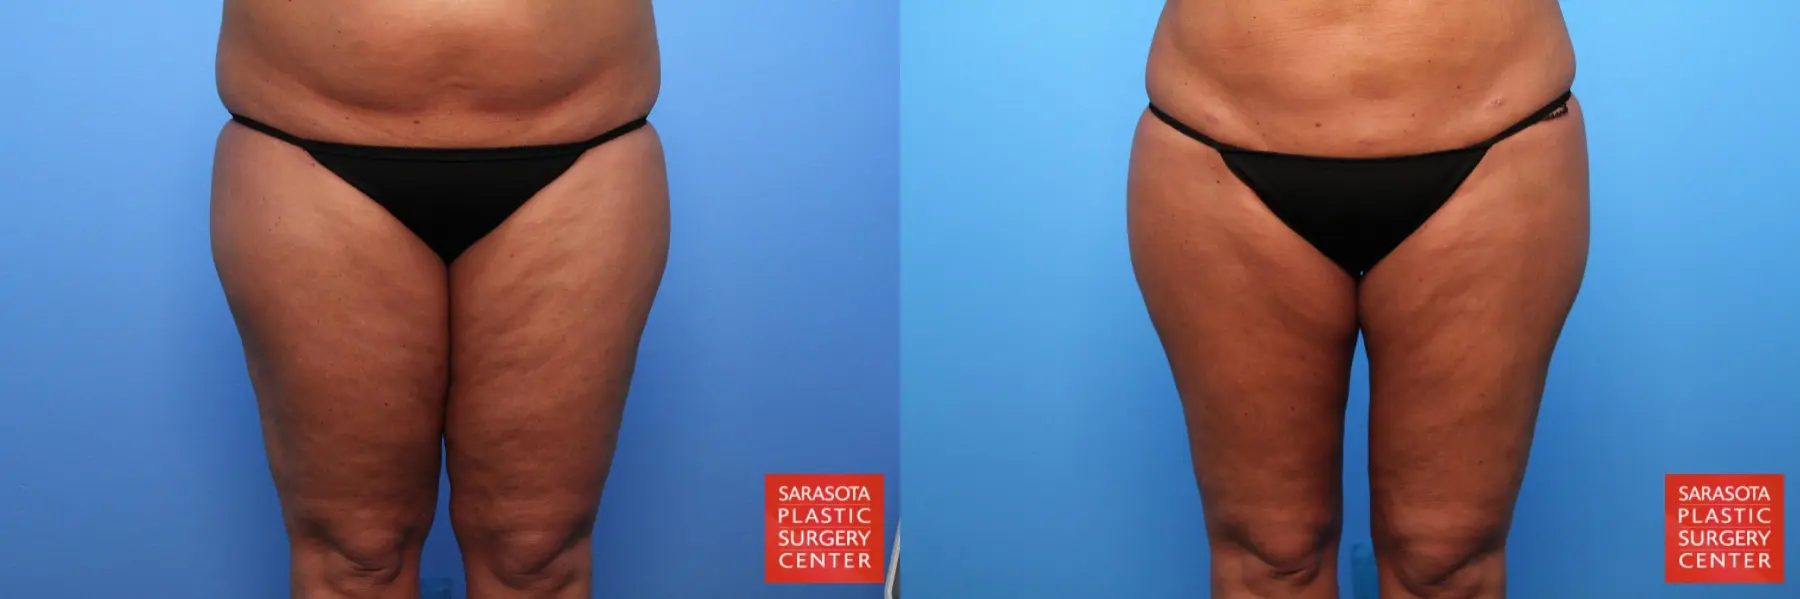 Liposuction: Patient 20 - Before and After  